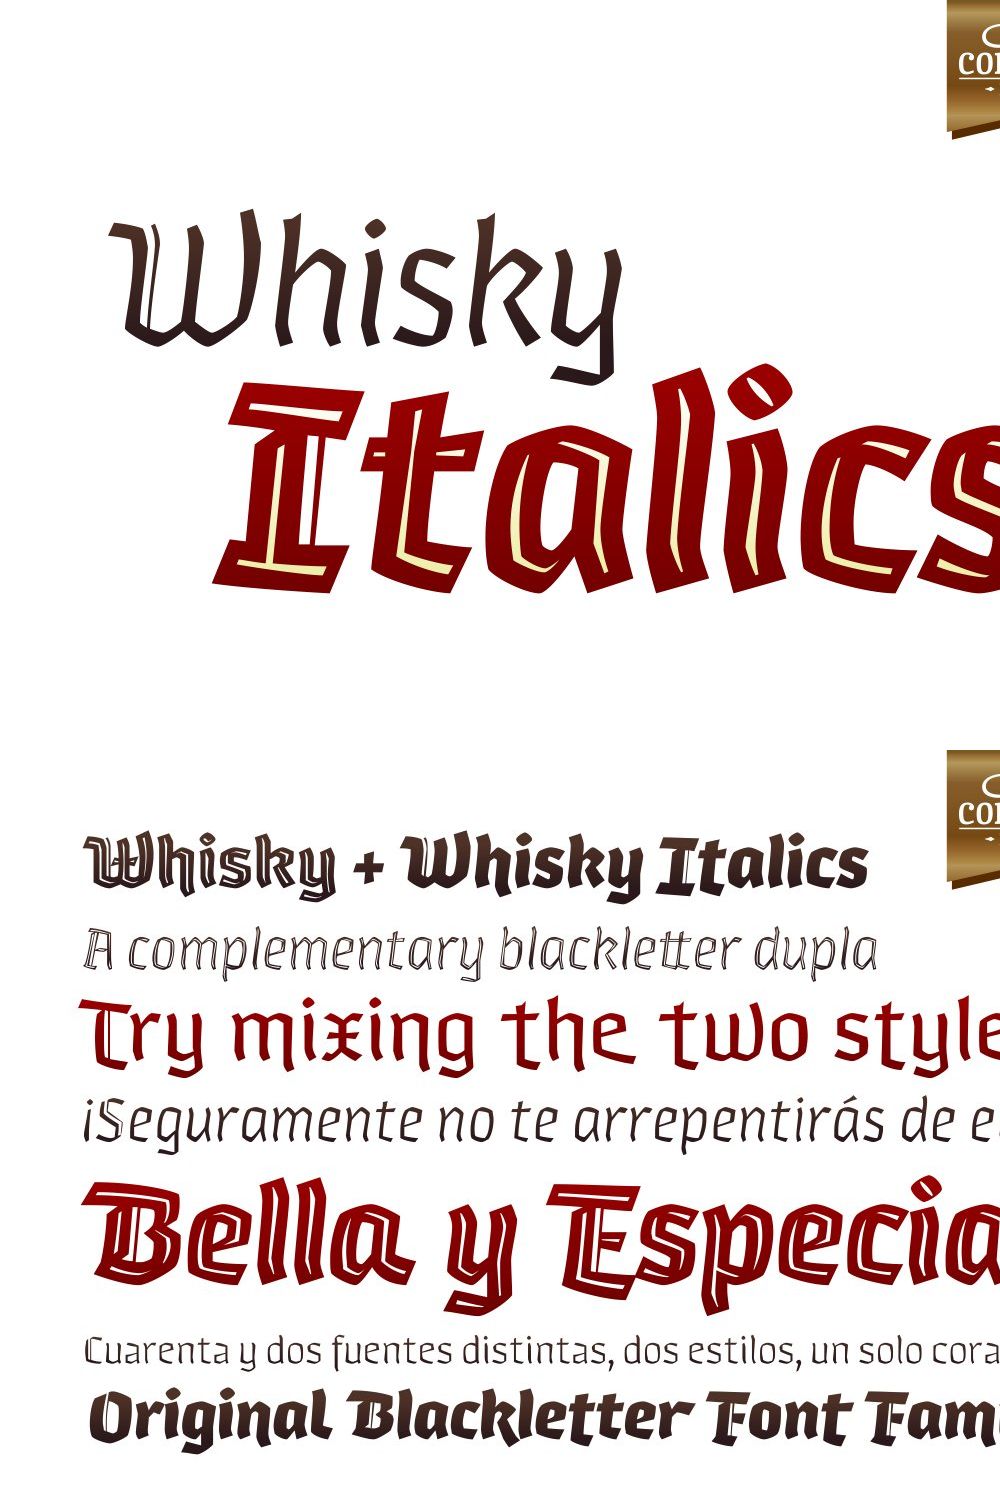 Whisky Italics pinterest preview image.